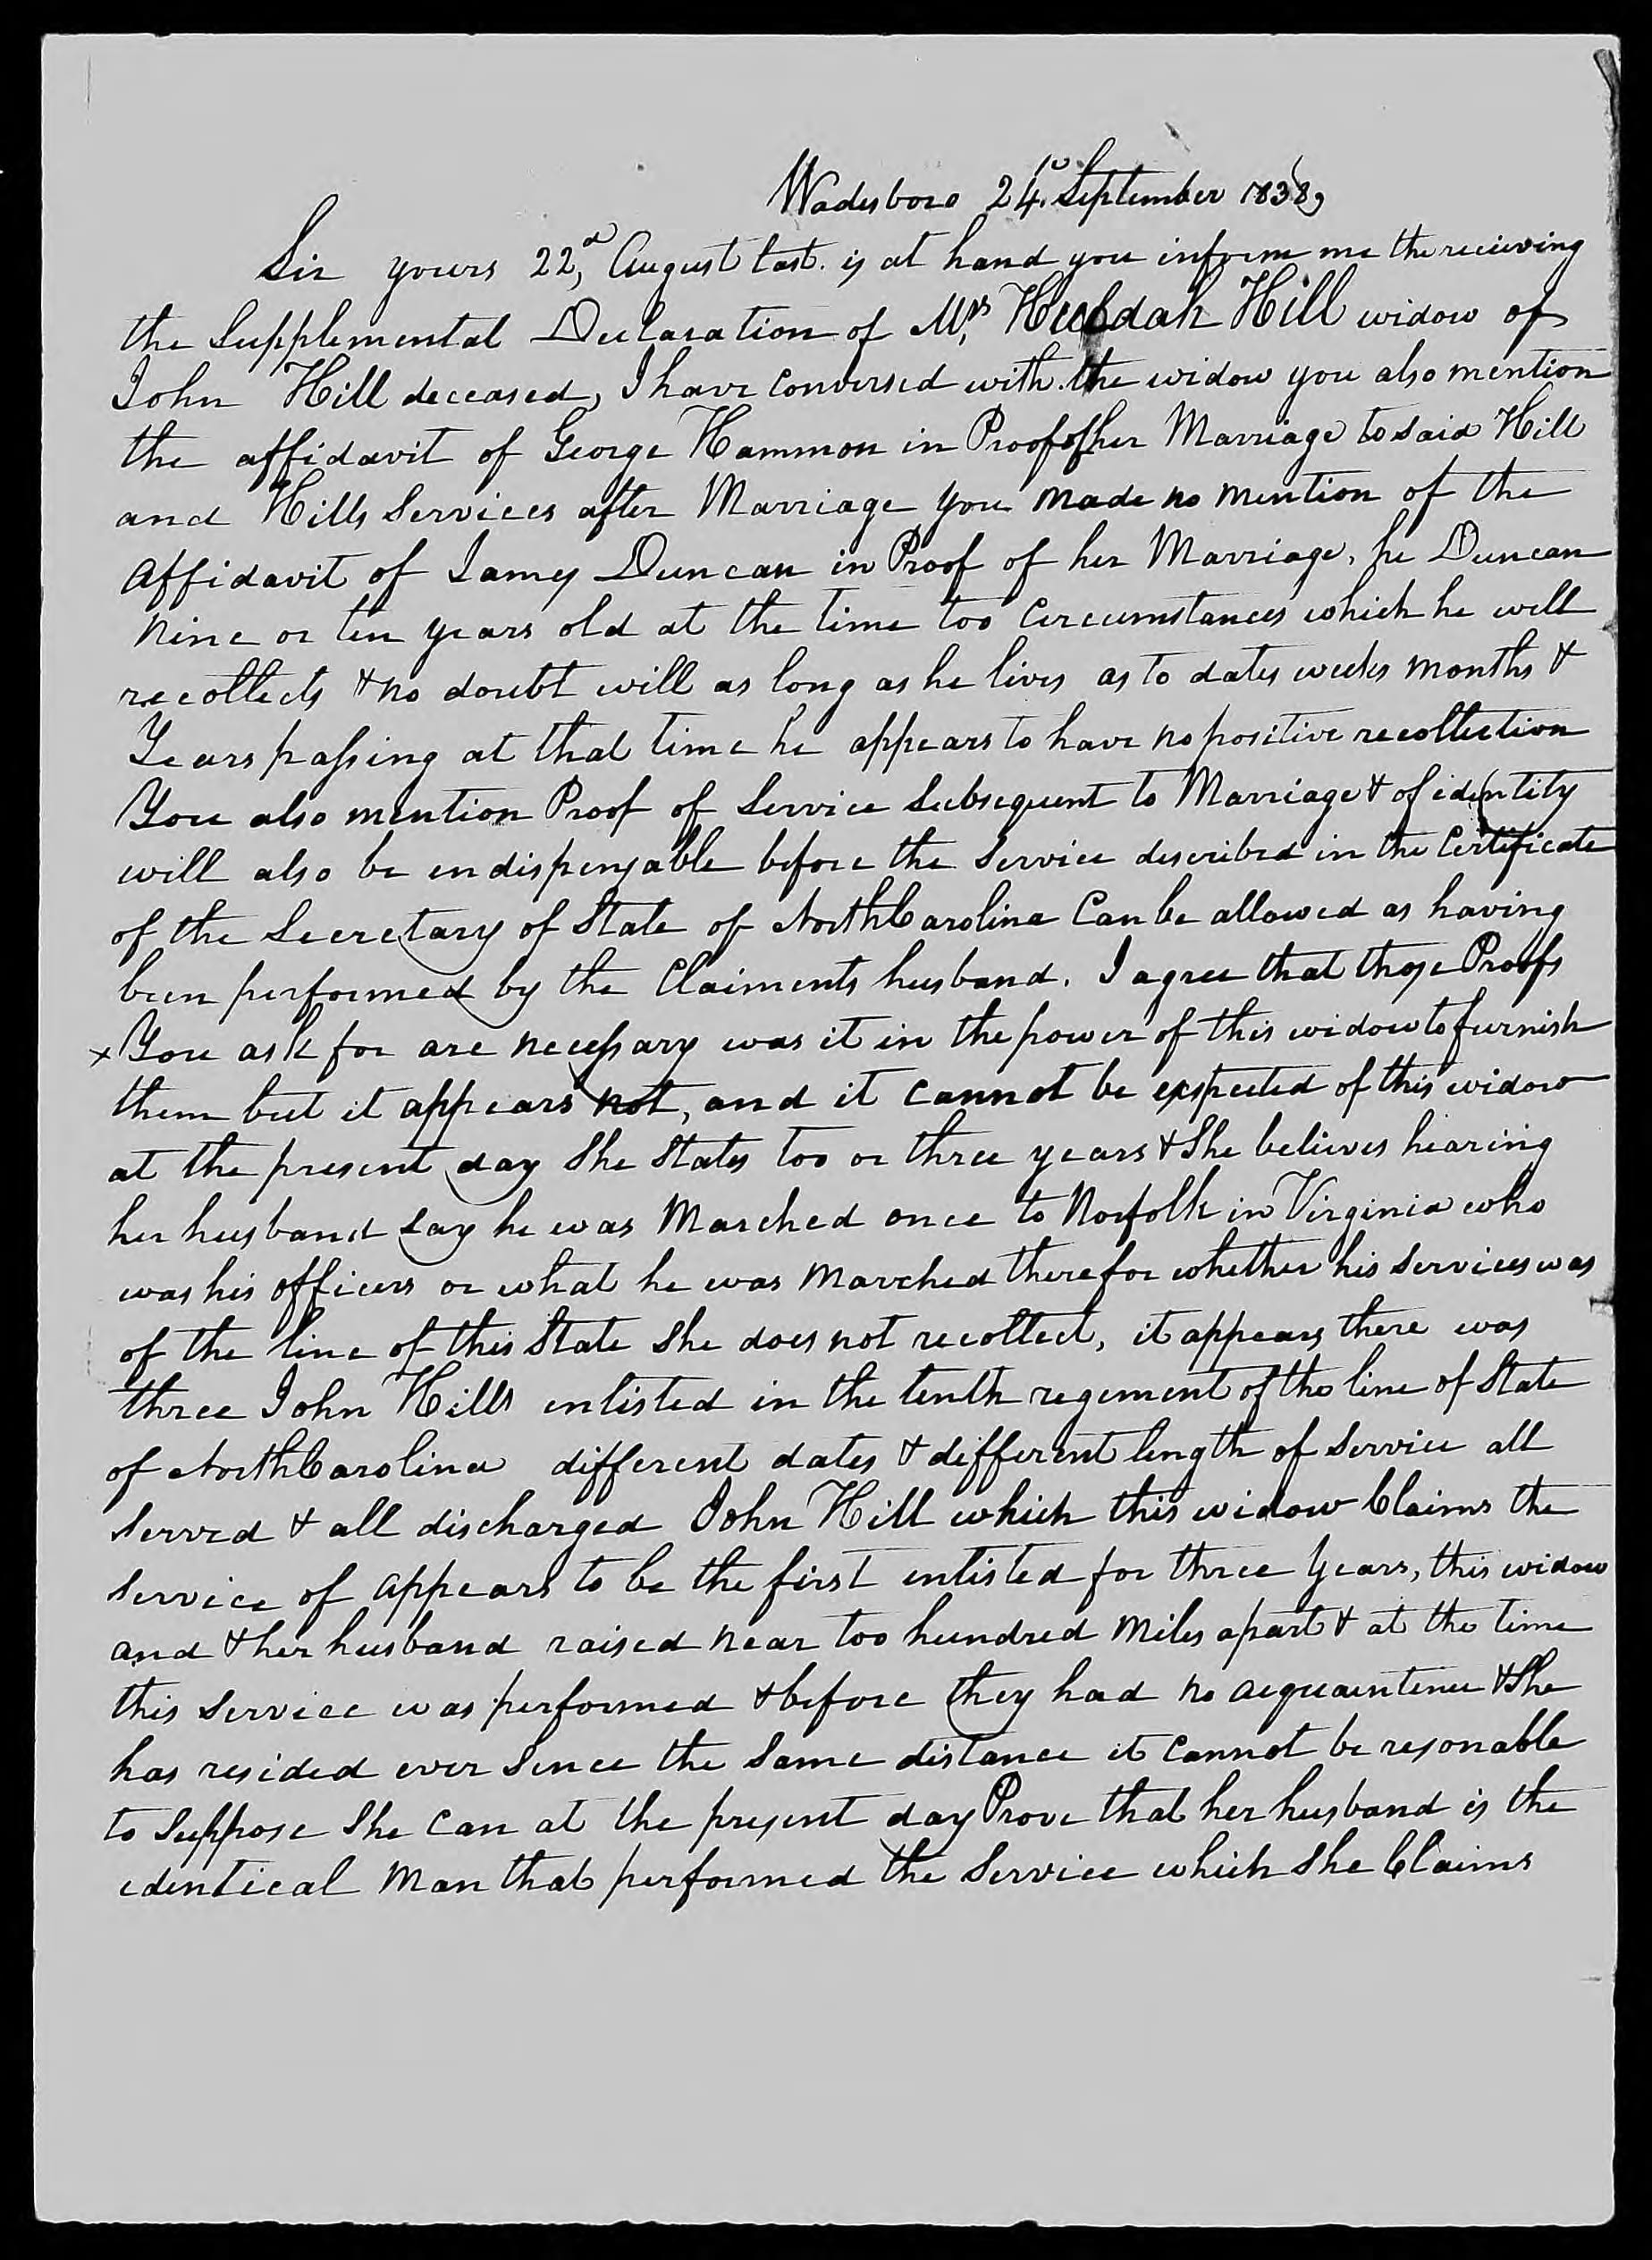 Letter from Rufus R. Johnson to James L. Edwards, 24 September 1838, page 1